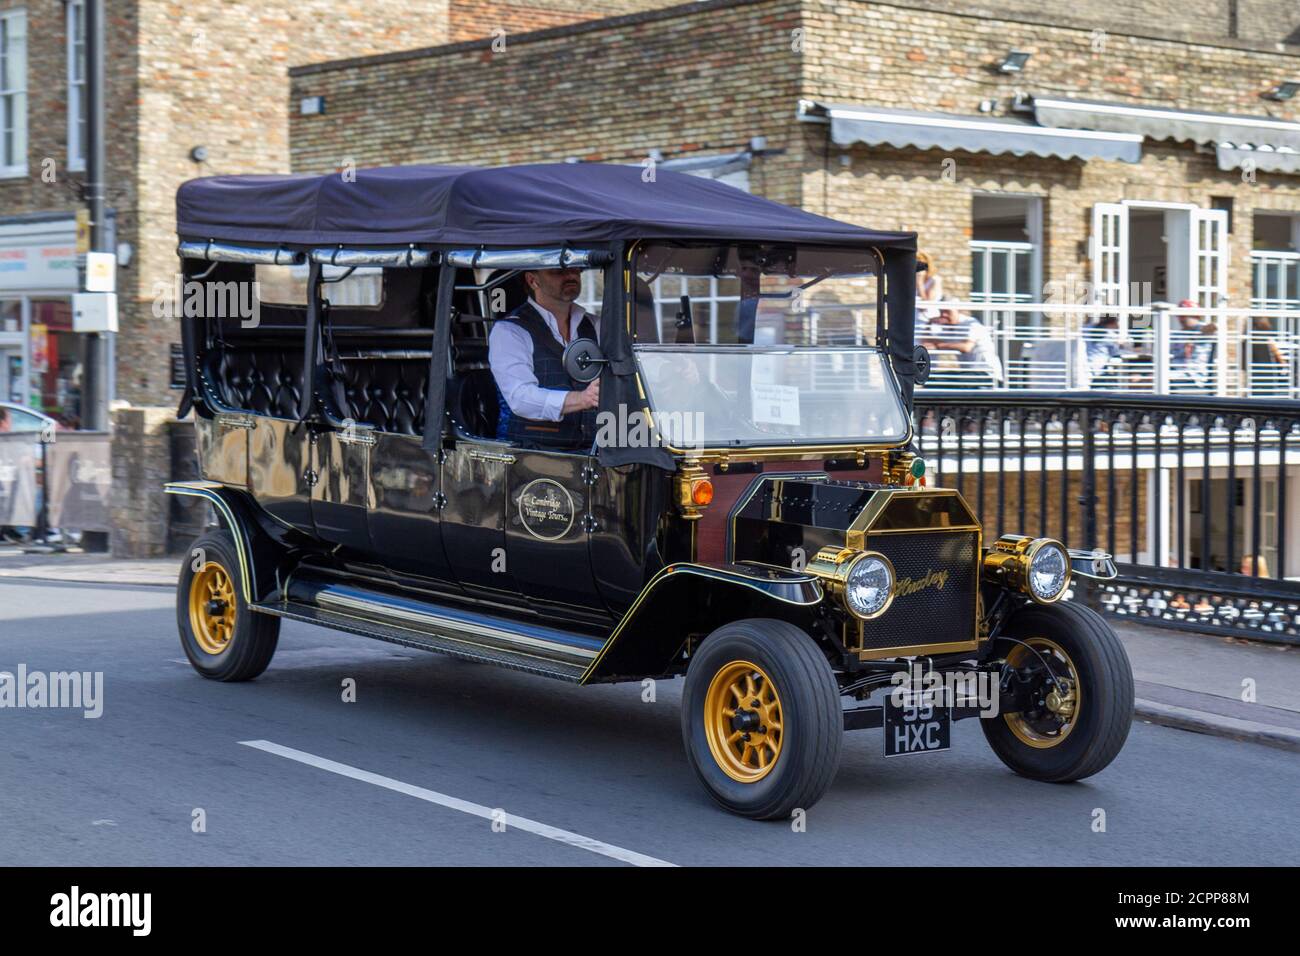 A Huxley 'vintage' car (it is actually an electric powered 1910 Model T Ford replica), part of Cambridge Vintage Tours in Cambridge, Cambridgeshi Stock Photo